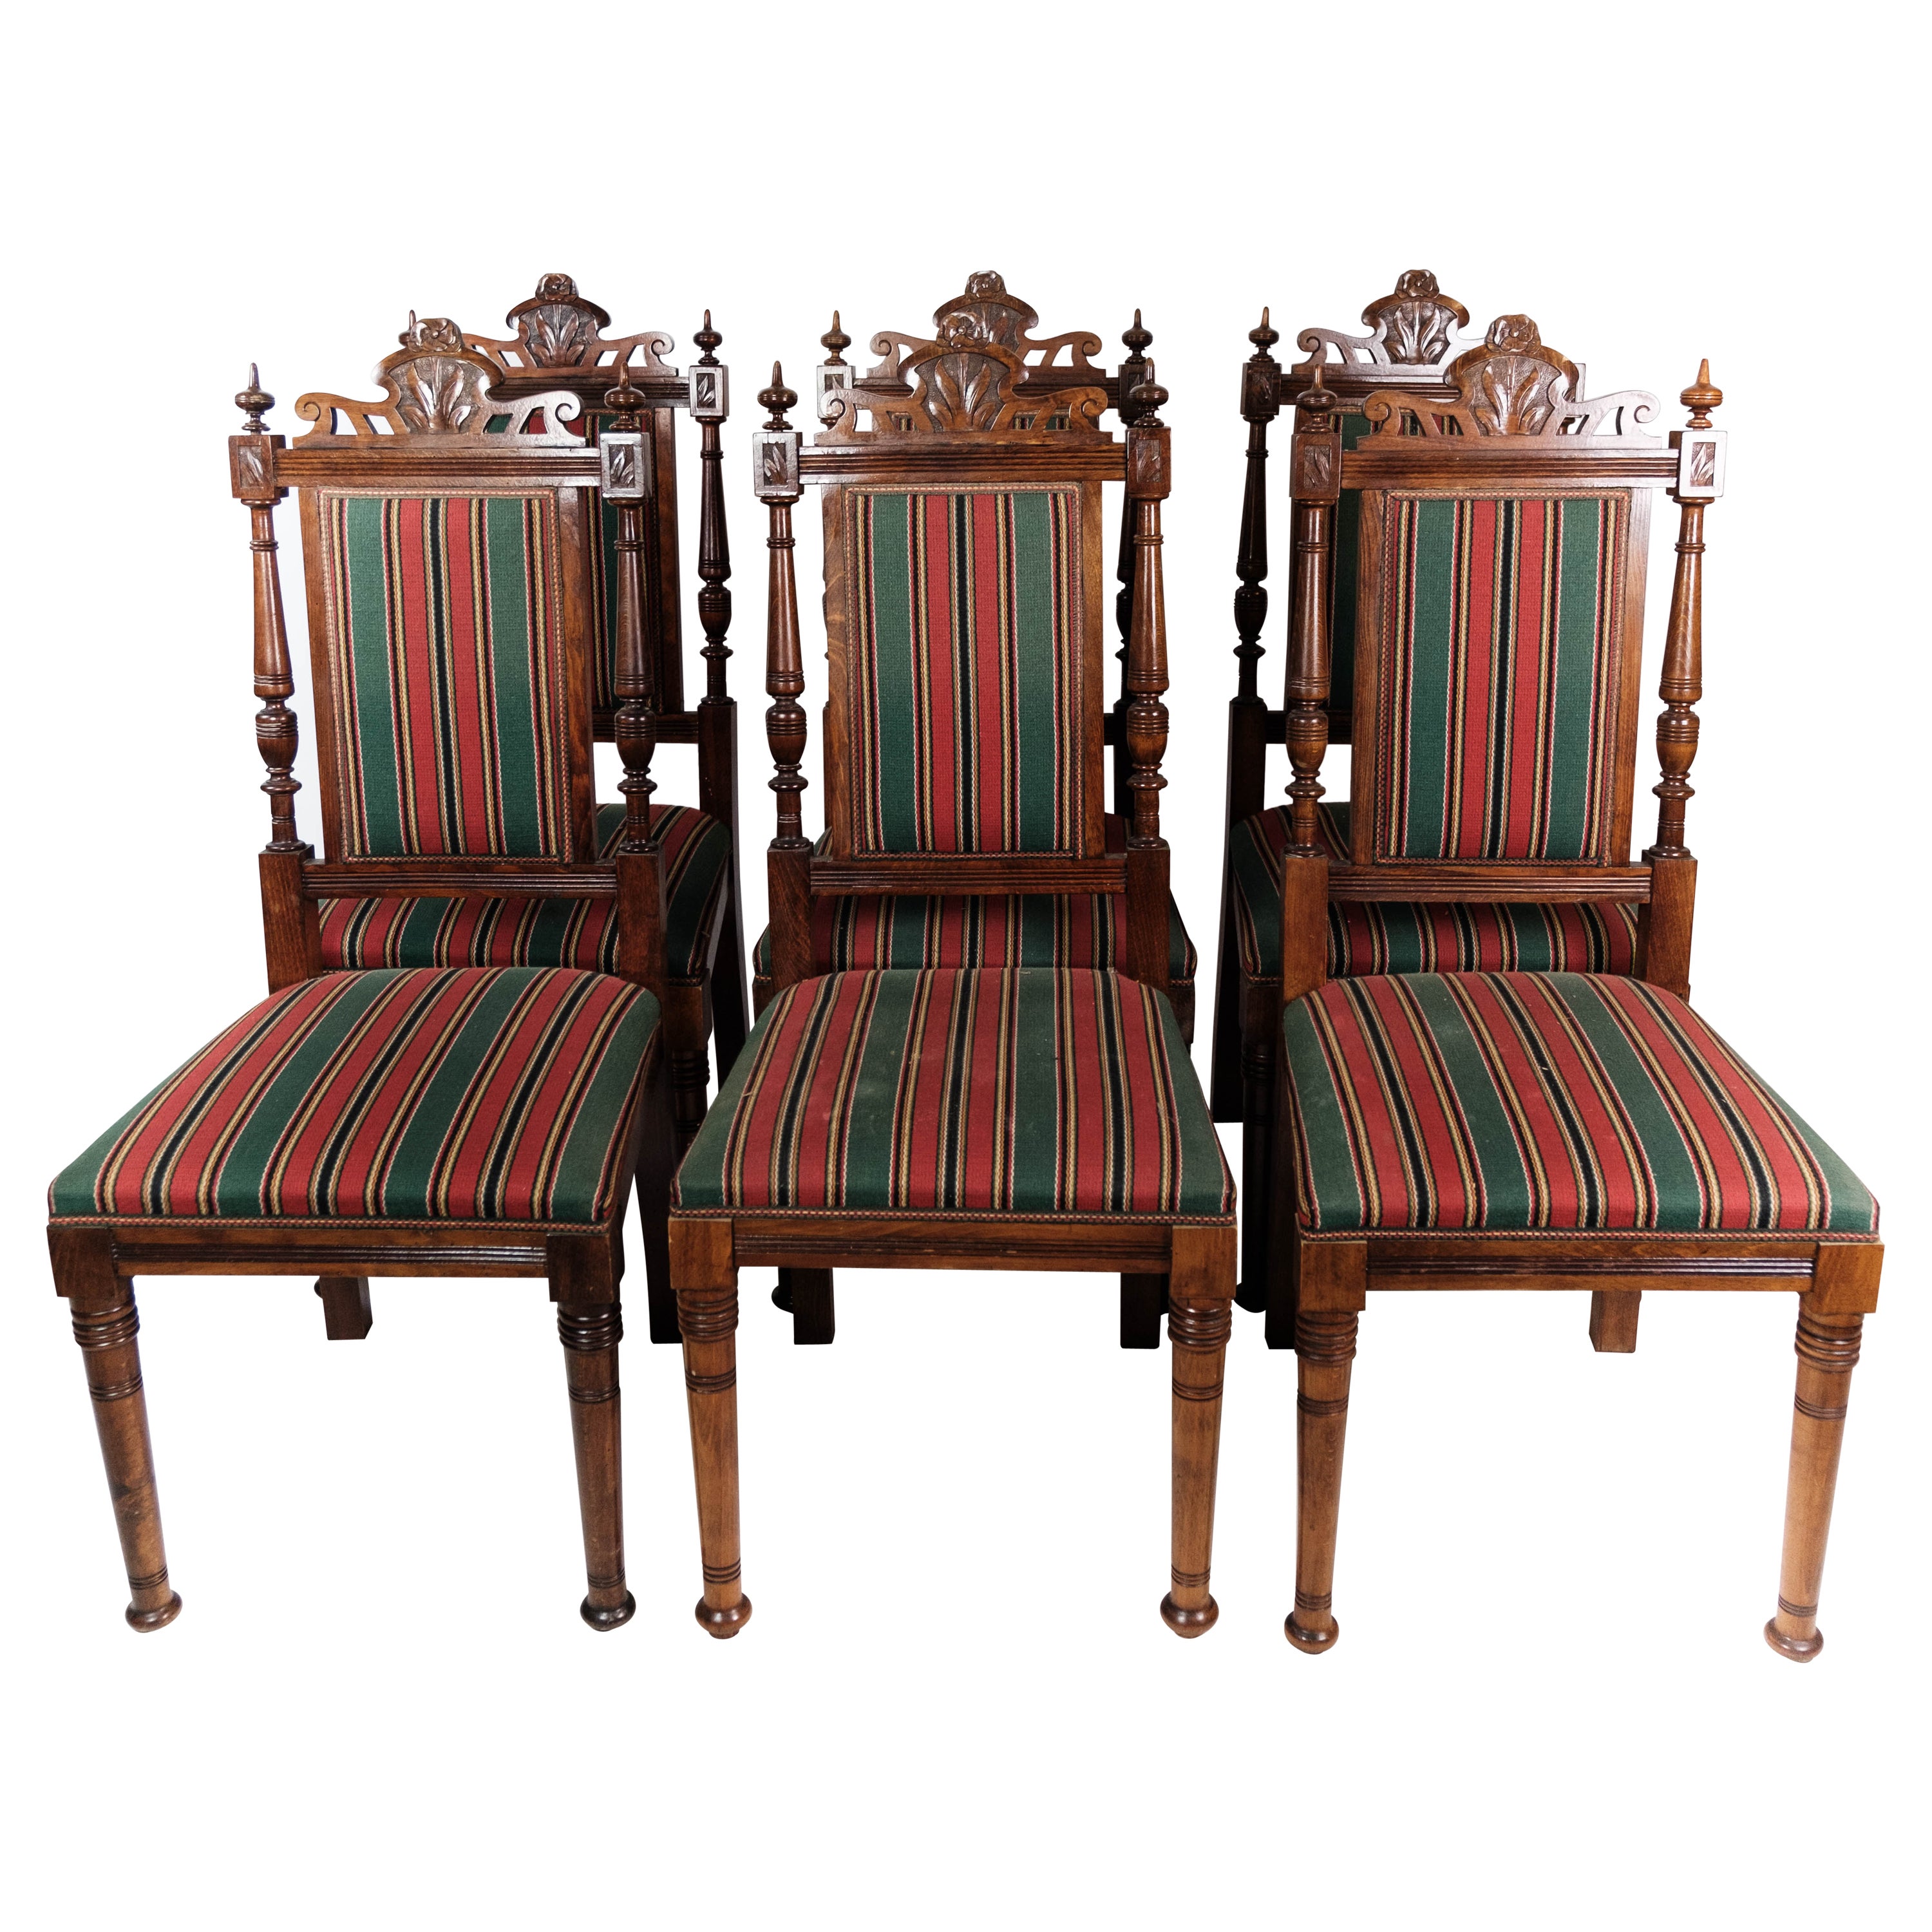 Set of Six Dining Room Chairs of Oak and Upholstered with Striped Fabric, 1920s For Sale